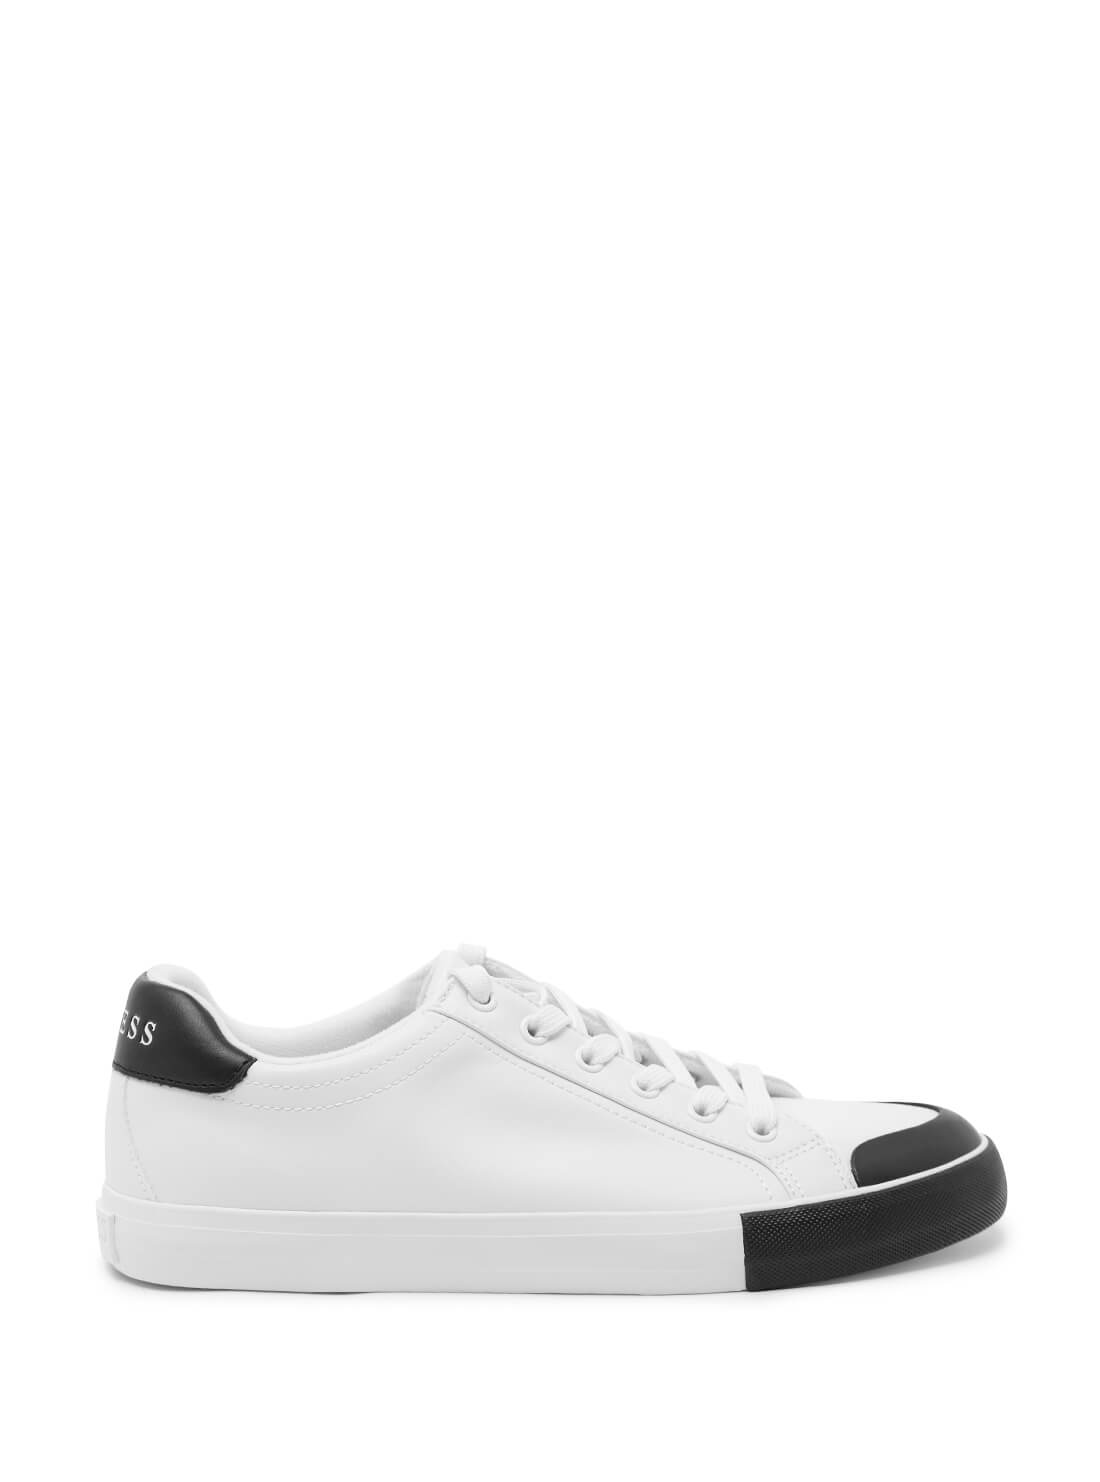 GUESS Mens White Low-Top Paxi Sneakers PAXI-A Side View